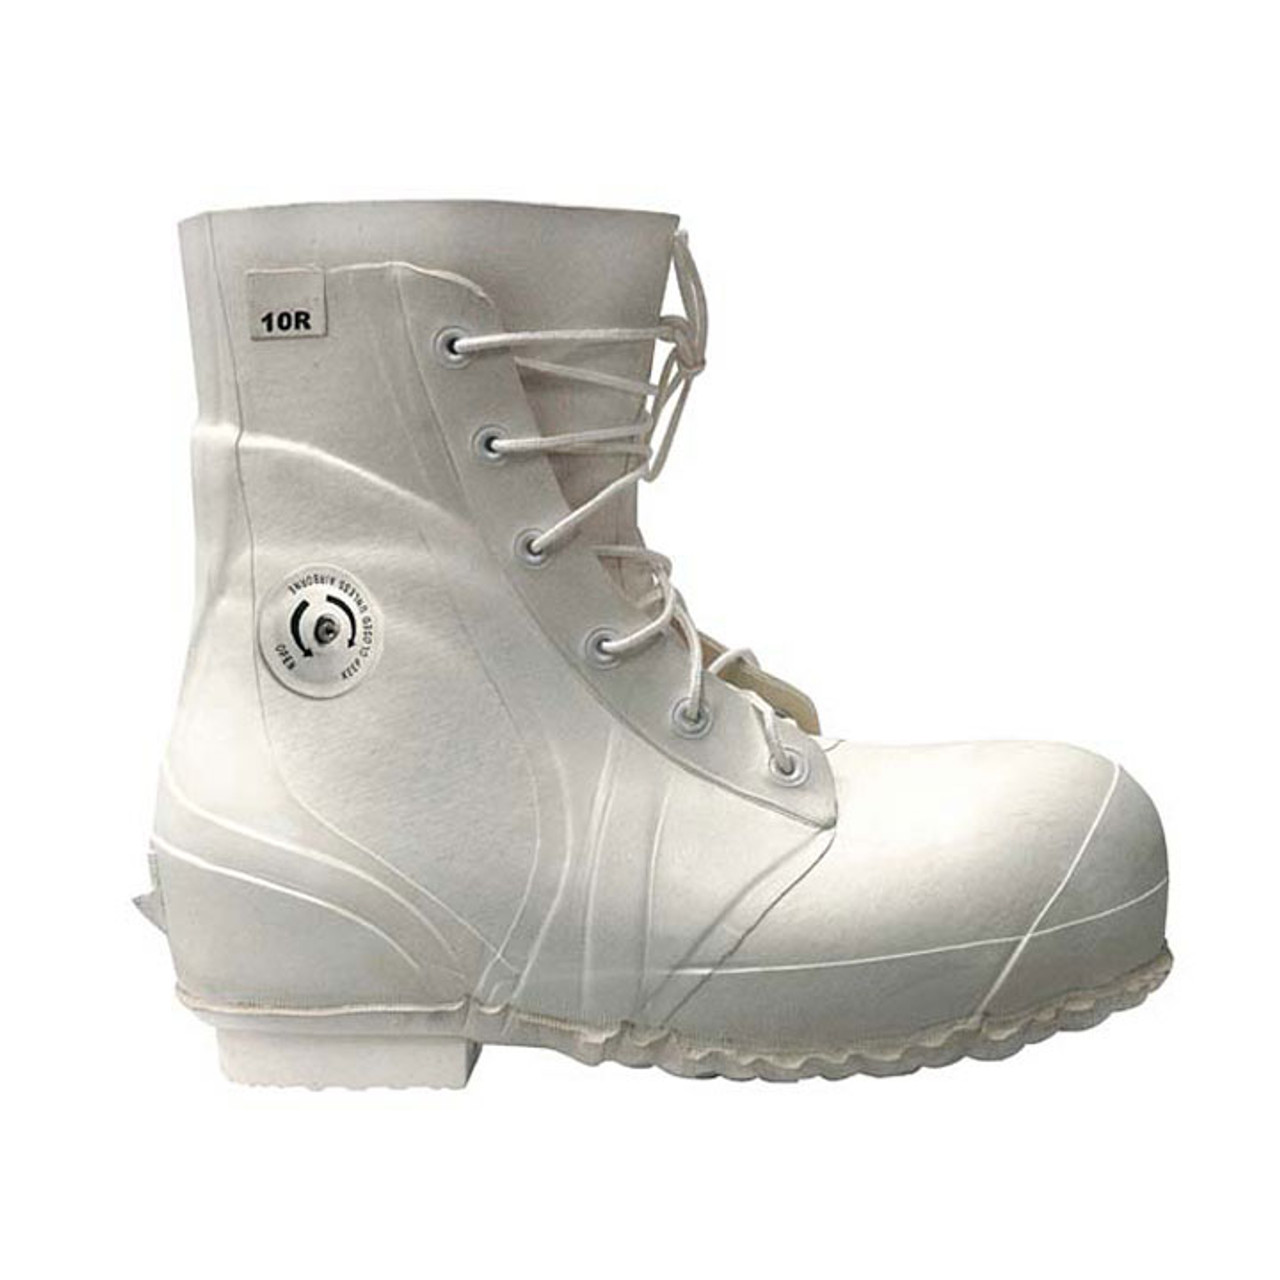 extreme cold vapor barrier boots